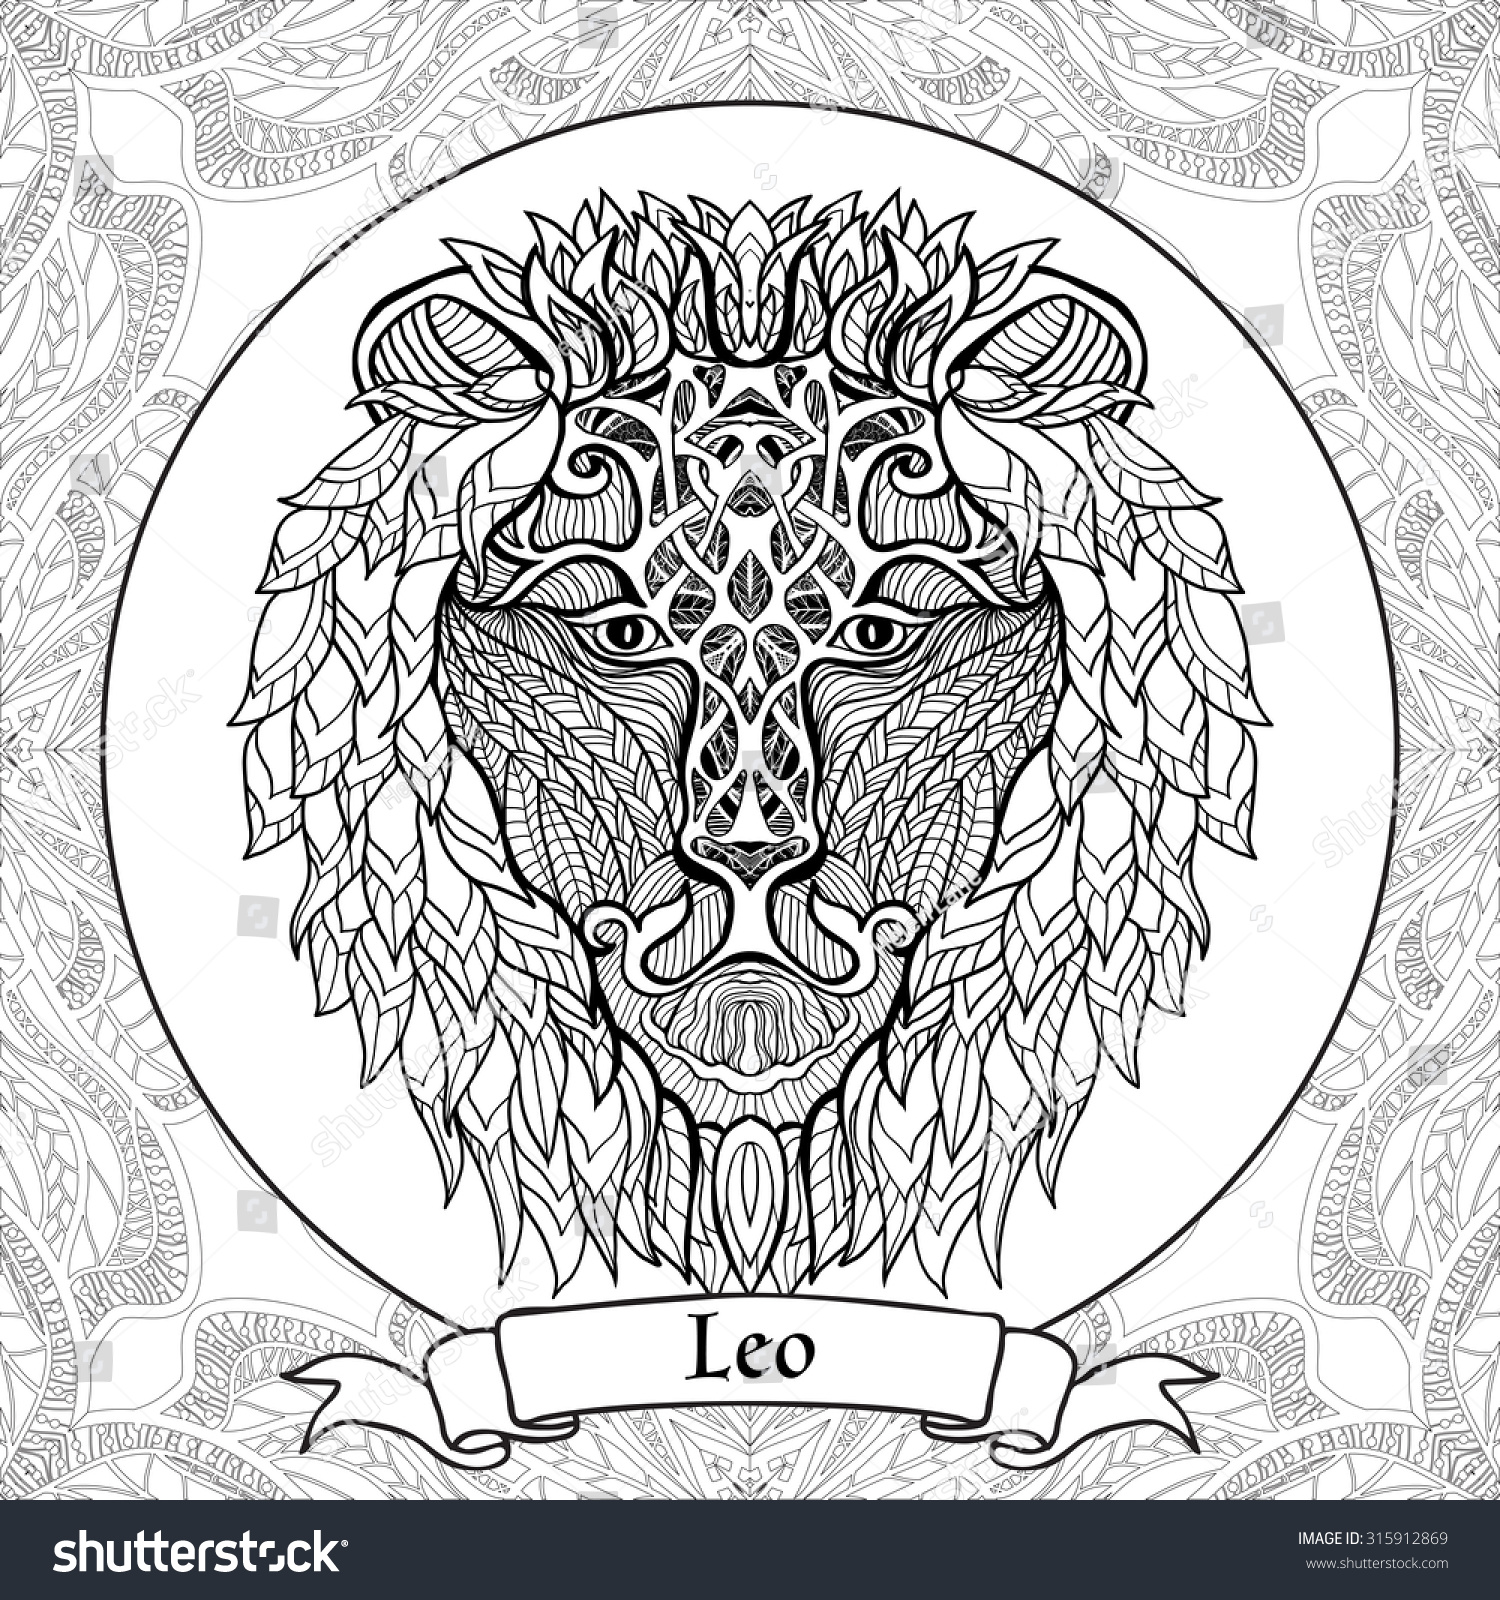 coloring page with pattern and zodiac sign leo royalty free stock vector 315912869 avopix com